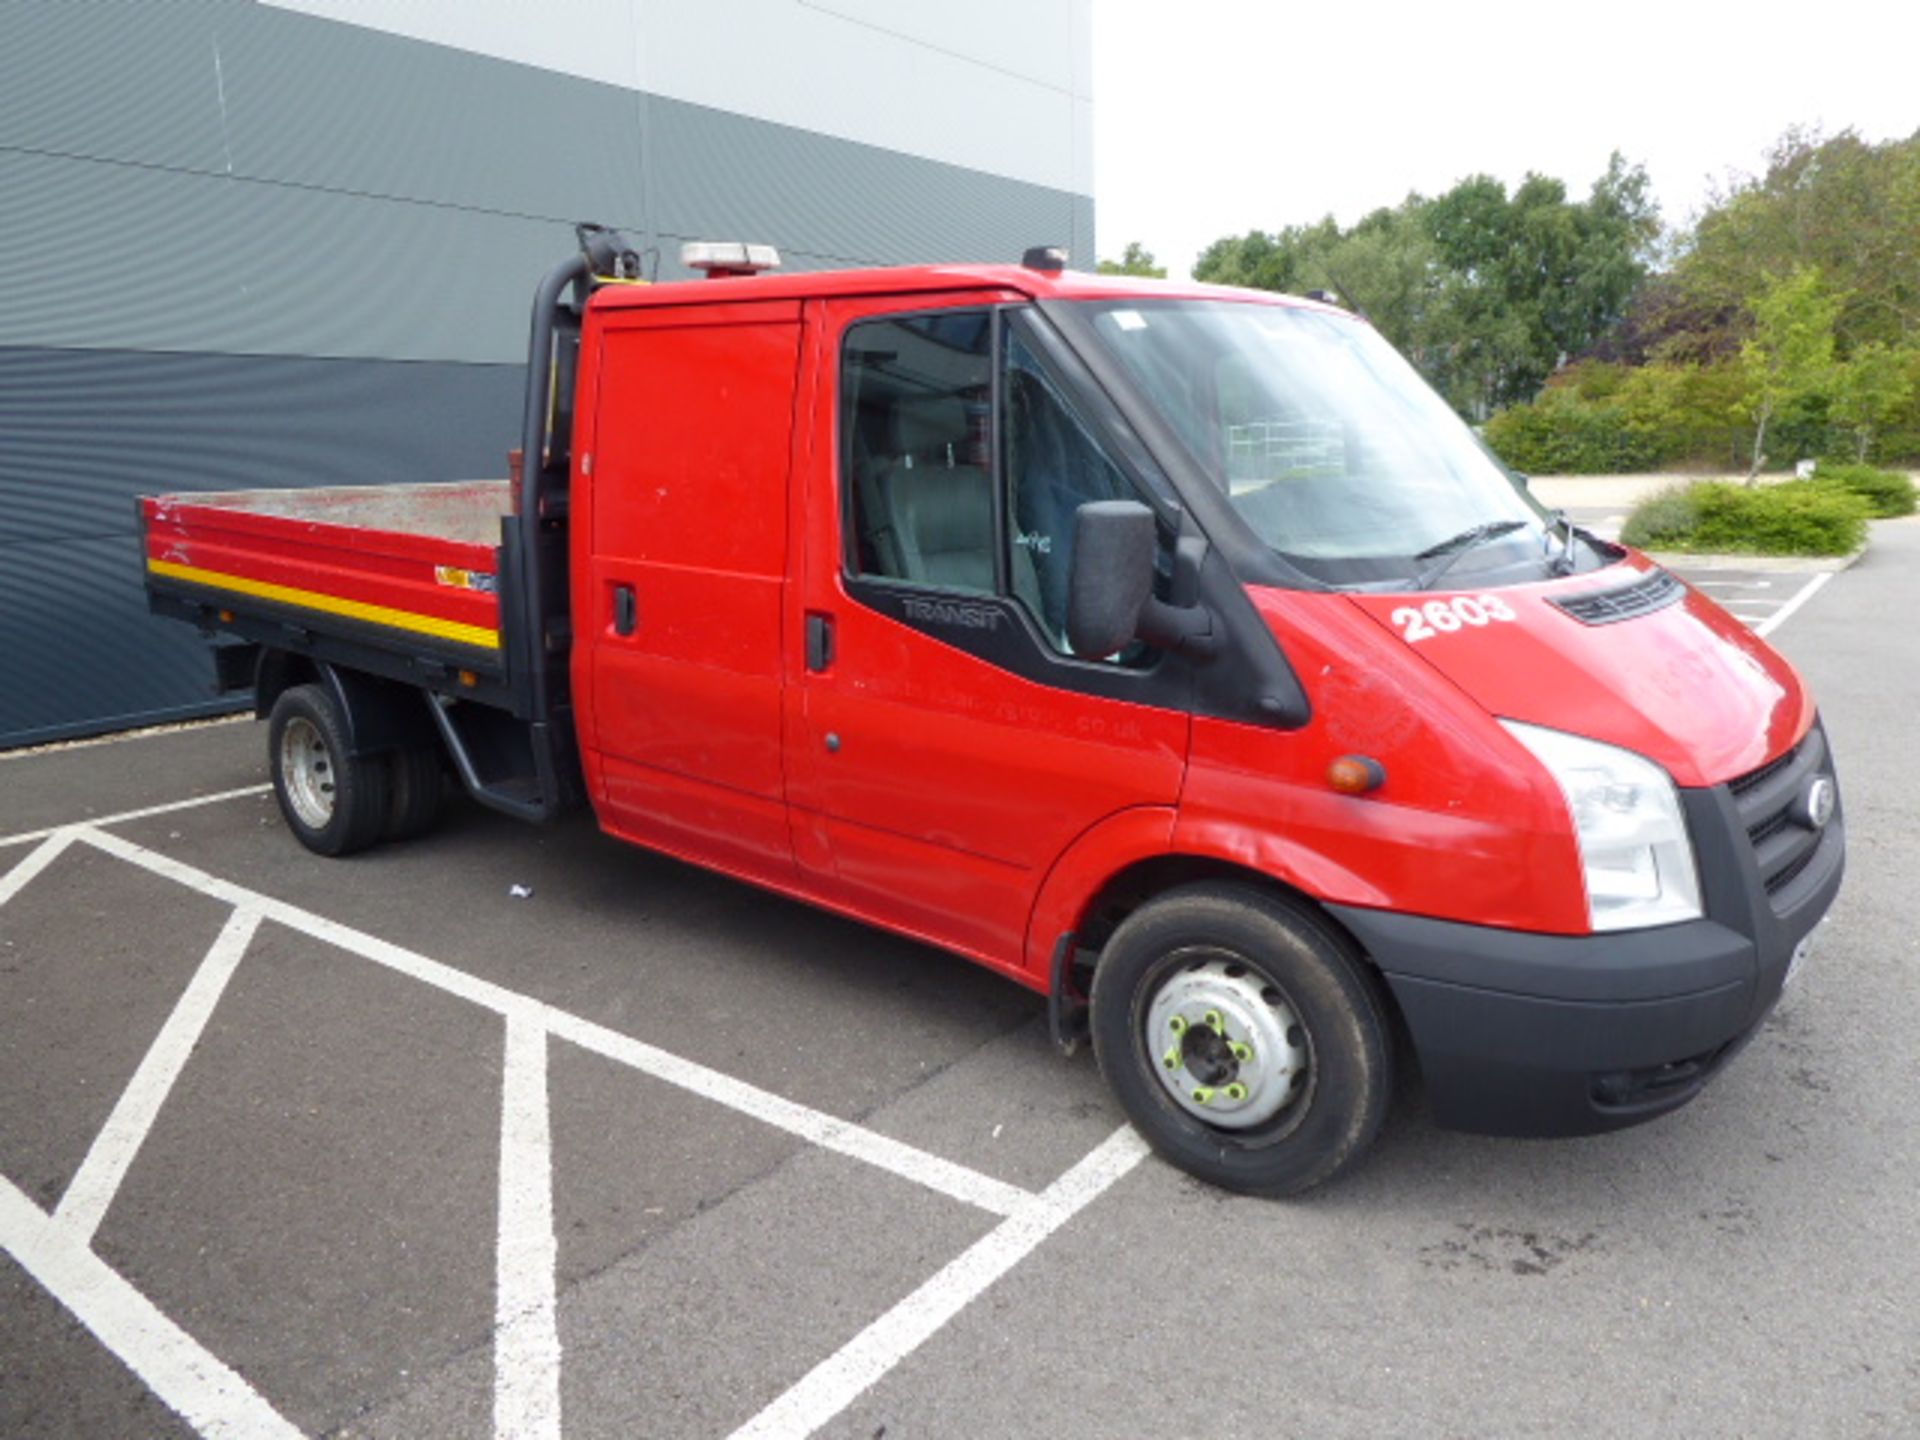 LO61 YWW (2011) Ford Transit 100 T350L D/C RWD, diesel in red/green MOT: 03/09/2020 - Image 2 of 10